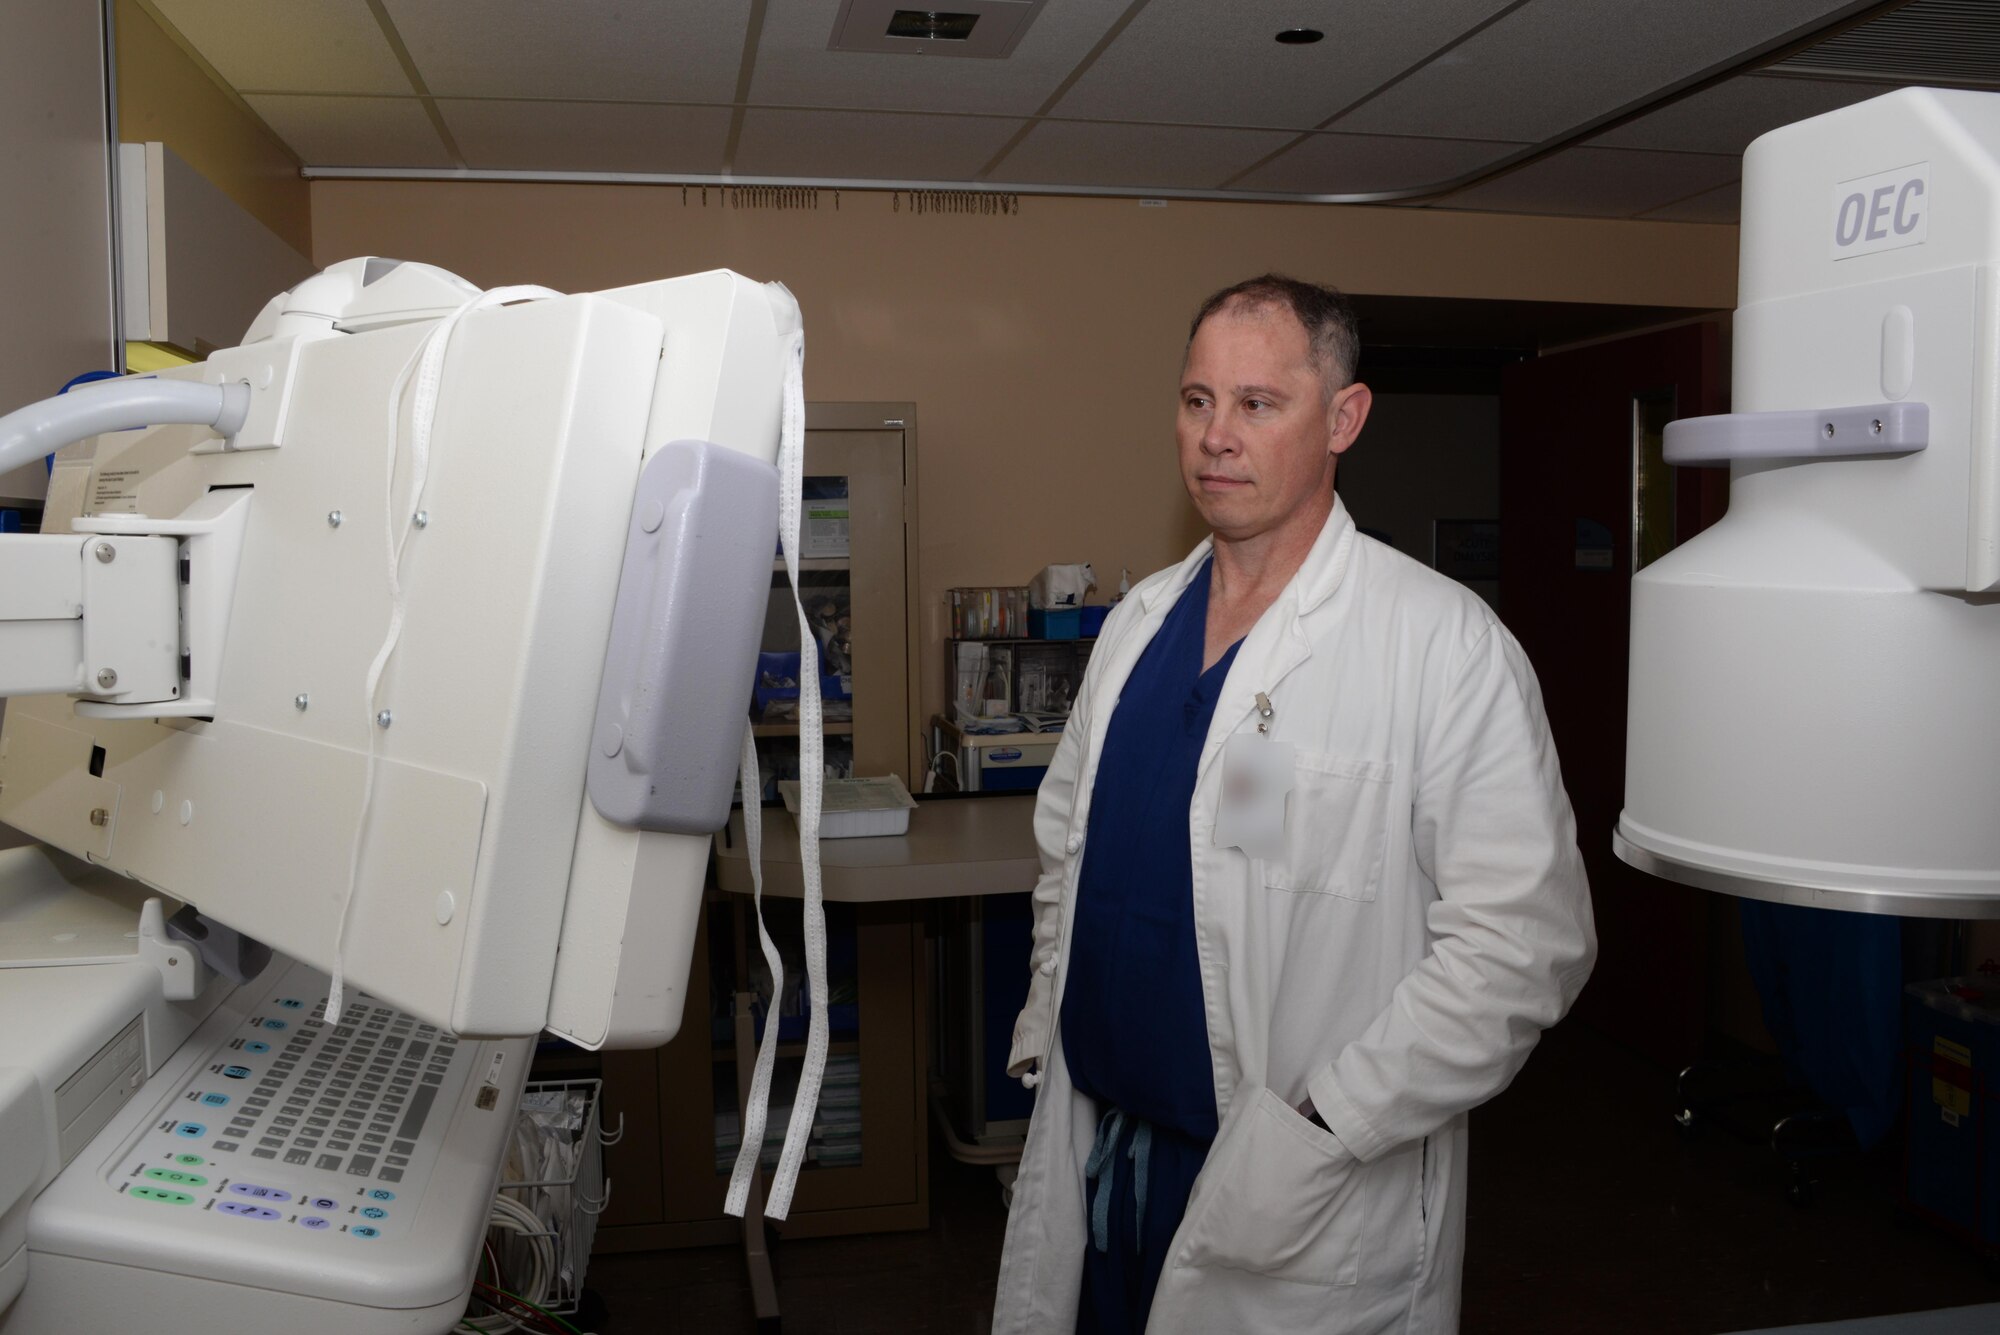 Dr. (Retired U.S. Army Lt. Col.) Ronald White, 60th Medical Surgical Operations Squadron chief of anesthesia and pain medicine, reviews X-rays in the David Grant USAF Medical Center at Travis Air Force Base, Calif., July 1, 2016. White oversees operations of the DGMC's Pain Clinic which opened in April 2016. The clinic provides services for patients experiencing acute pain, as well as chronic pain. Photo altered for security purposes. (U.S. Air Force photo by Tech. Sgt. James Hodgman/Released)